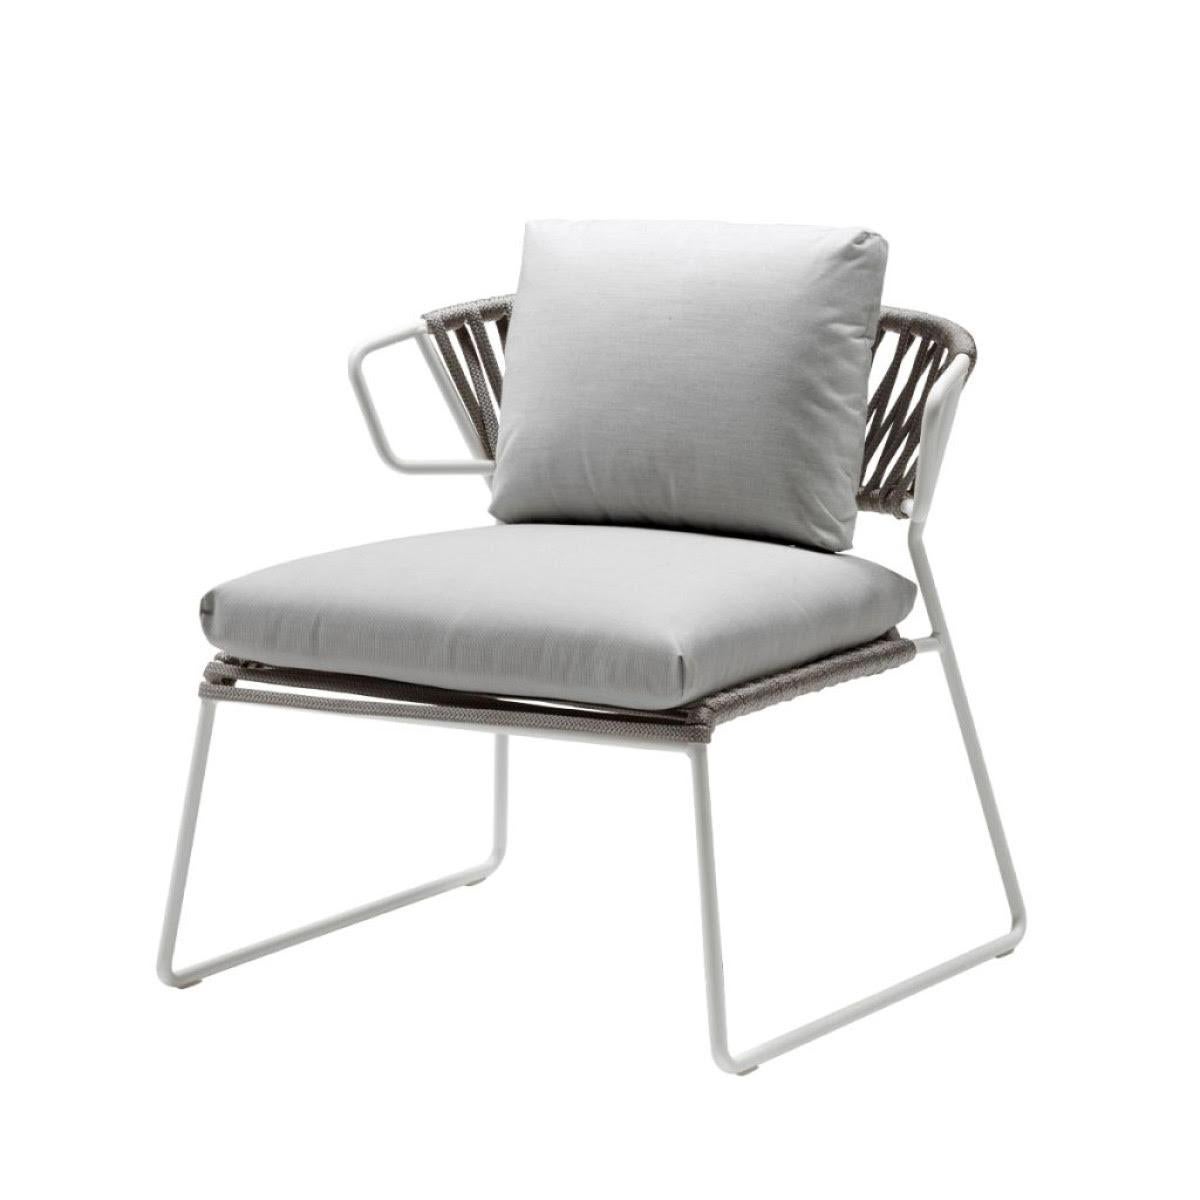 Modern Grey Armchair Outdoor or Indoor in Metal and Ropes, 21 century
Modern production armchair for outdoors or indoors. The frame is made of metal and reinforced with ropes on the back and seat. This armchair has an innovative, modern and fresh